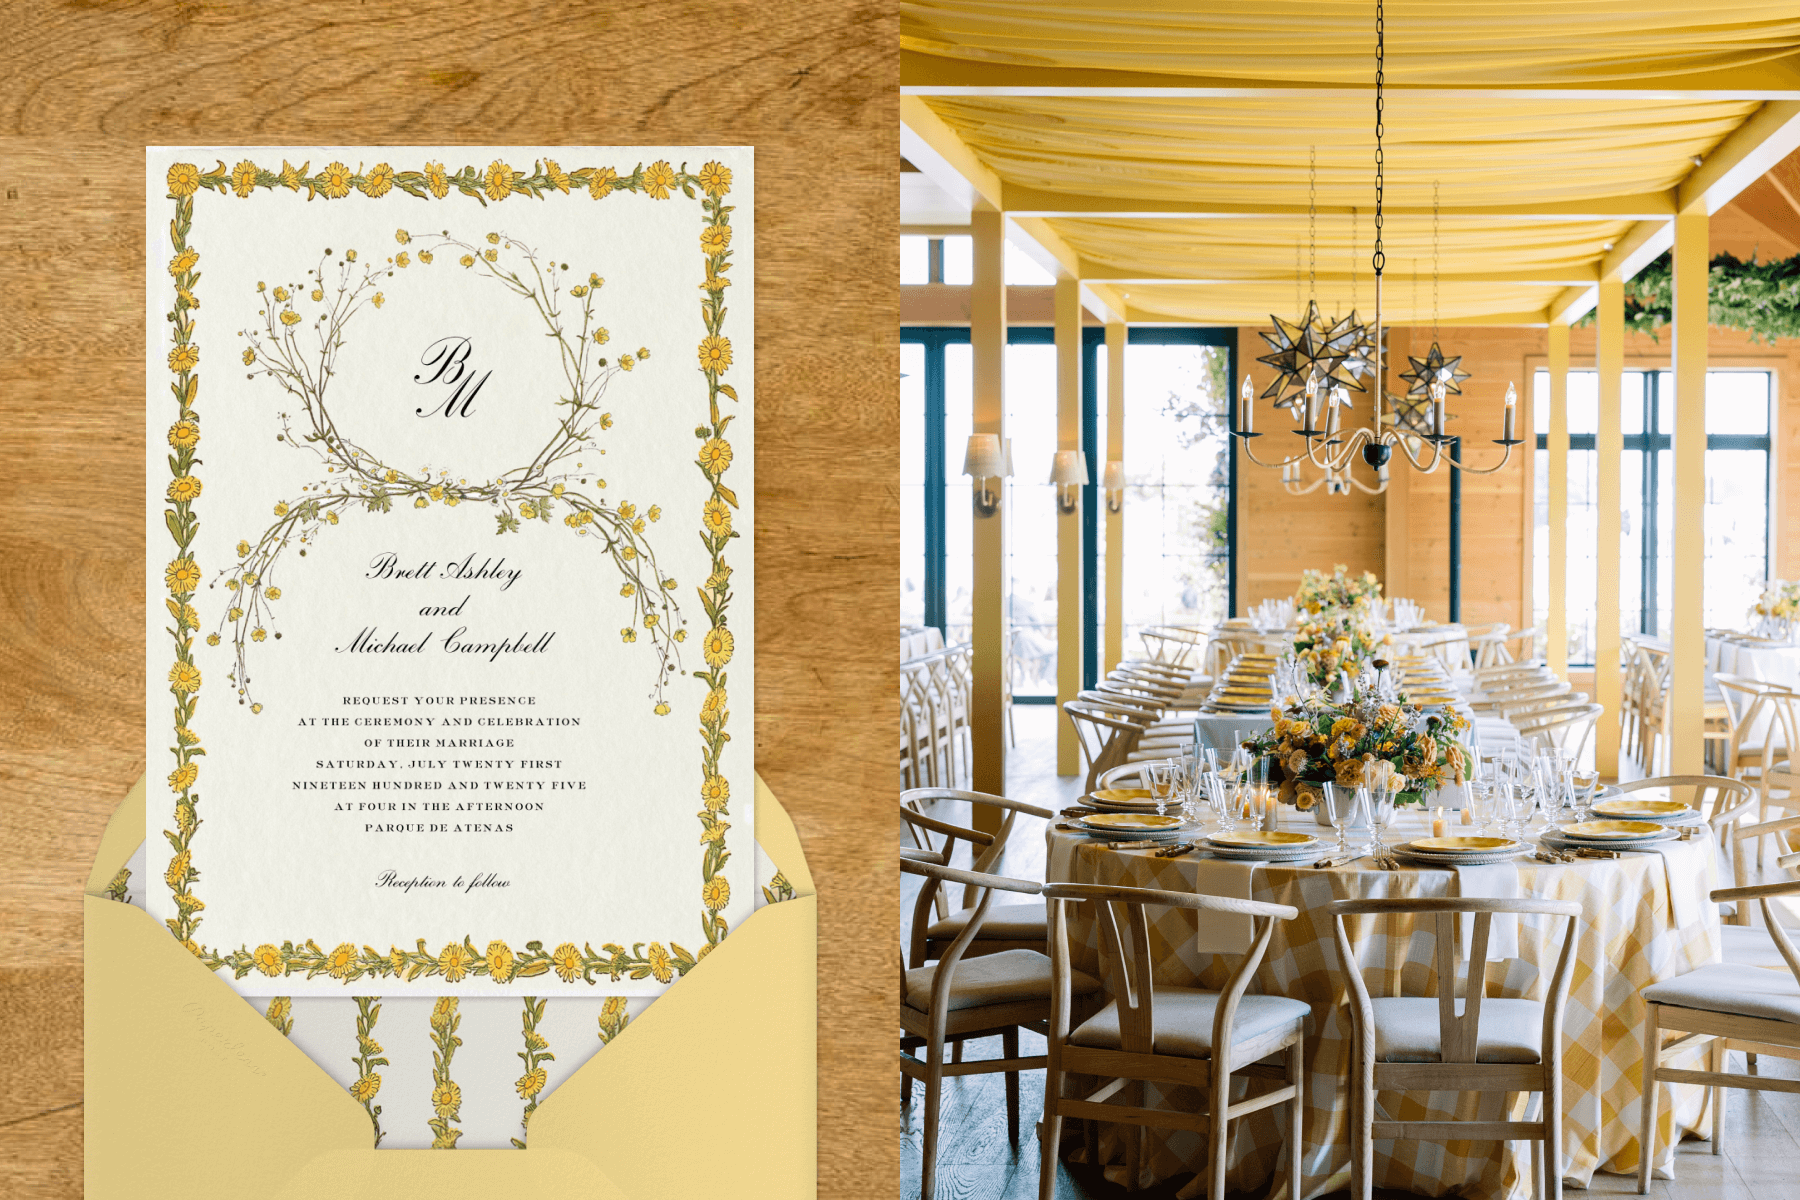 Left: A yellow floral invitation with a lush border and monogram; right: a yellow-hued interior with a nicely set table.